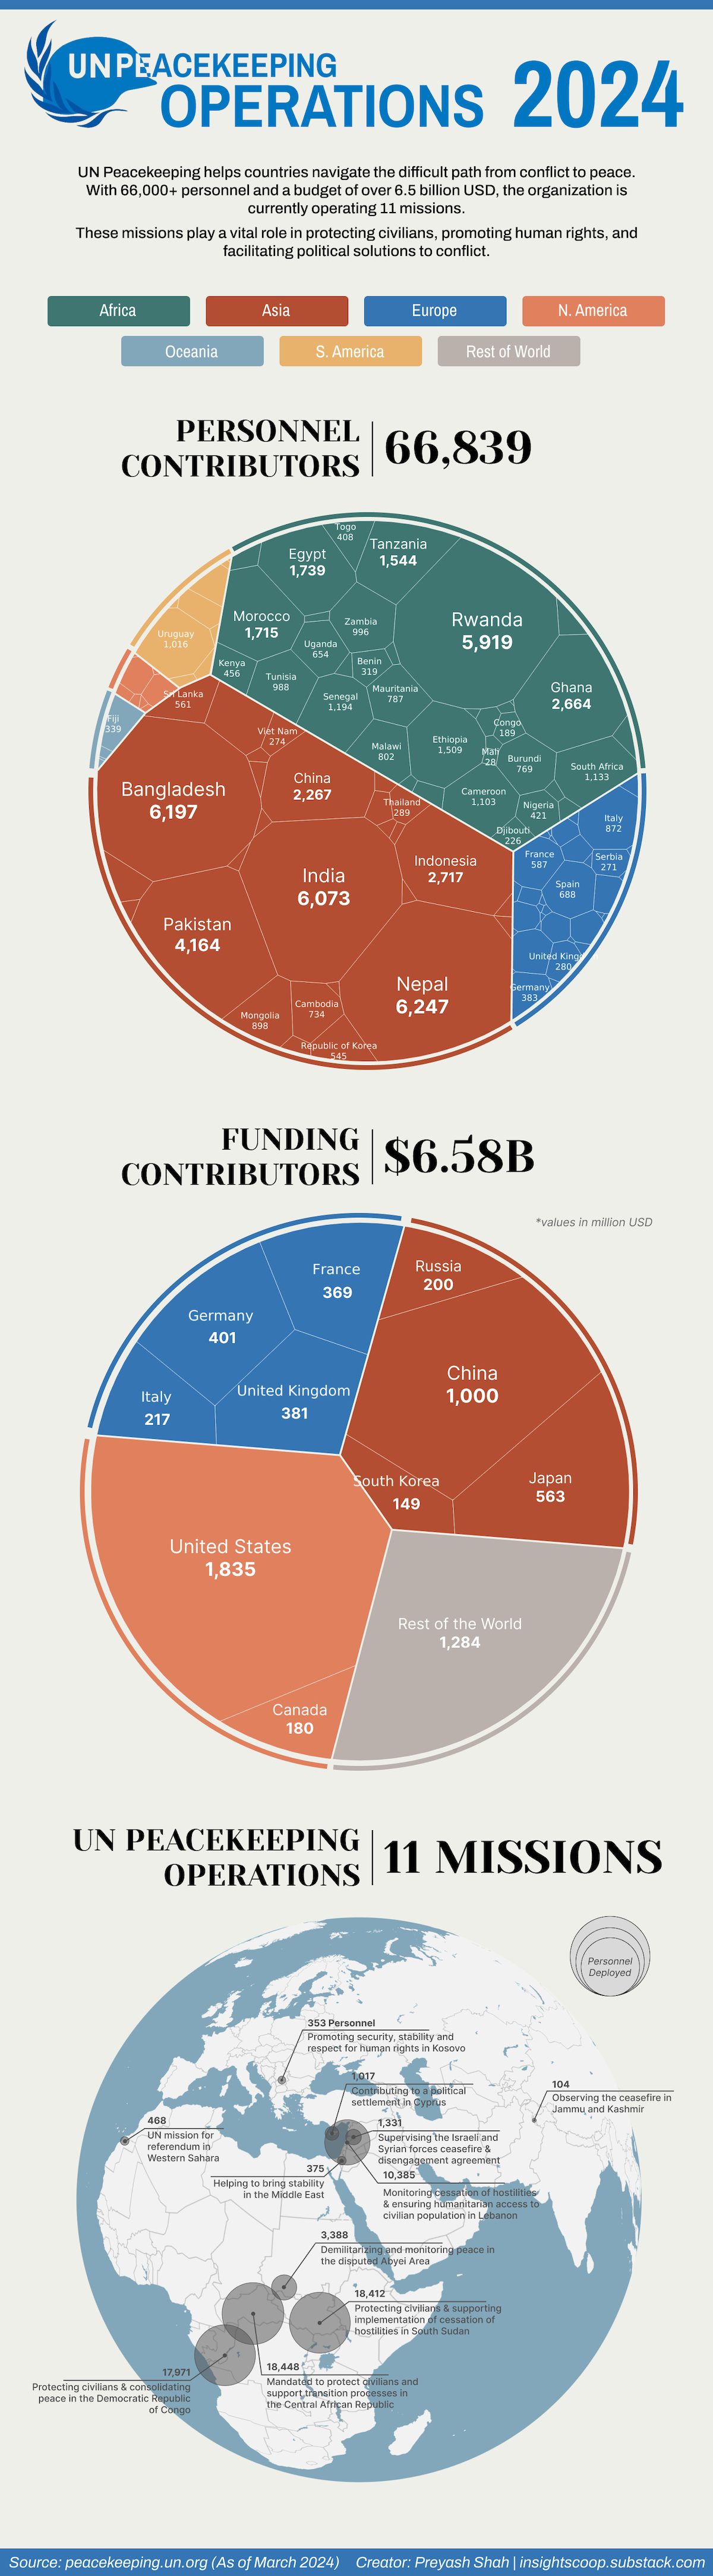 A trio of charts showing the funding and personnel contributors to UN Peacekeeping forces, and location of current missions.